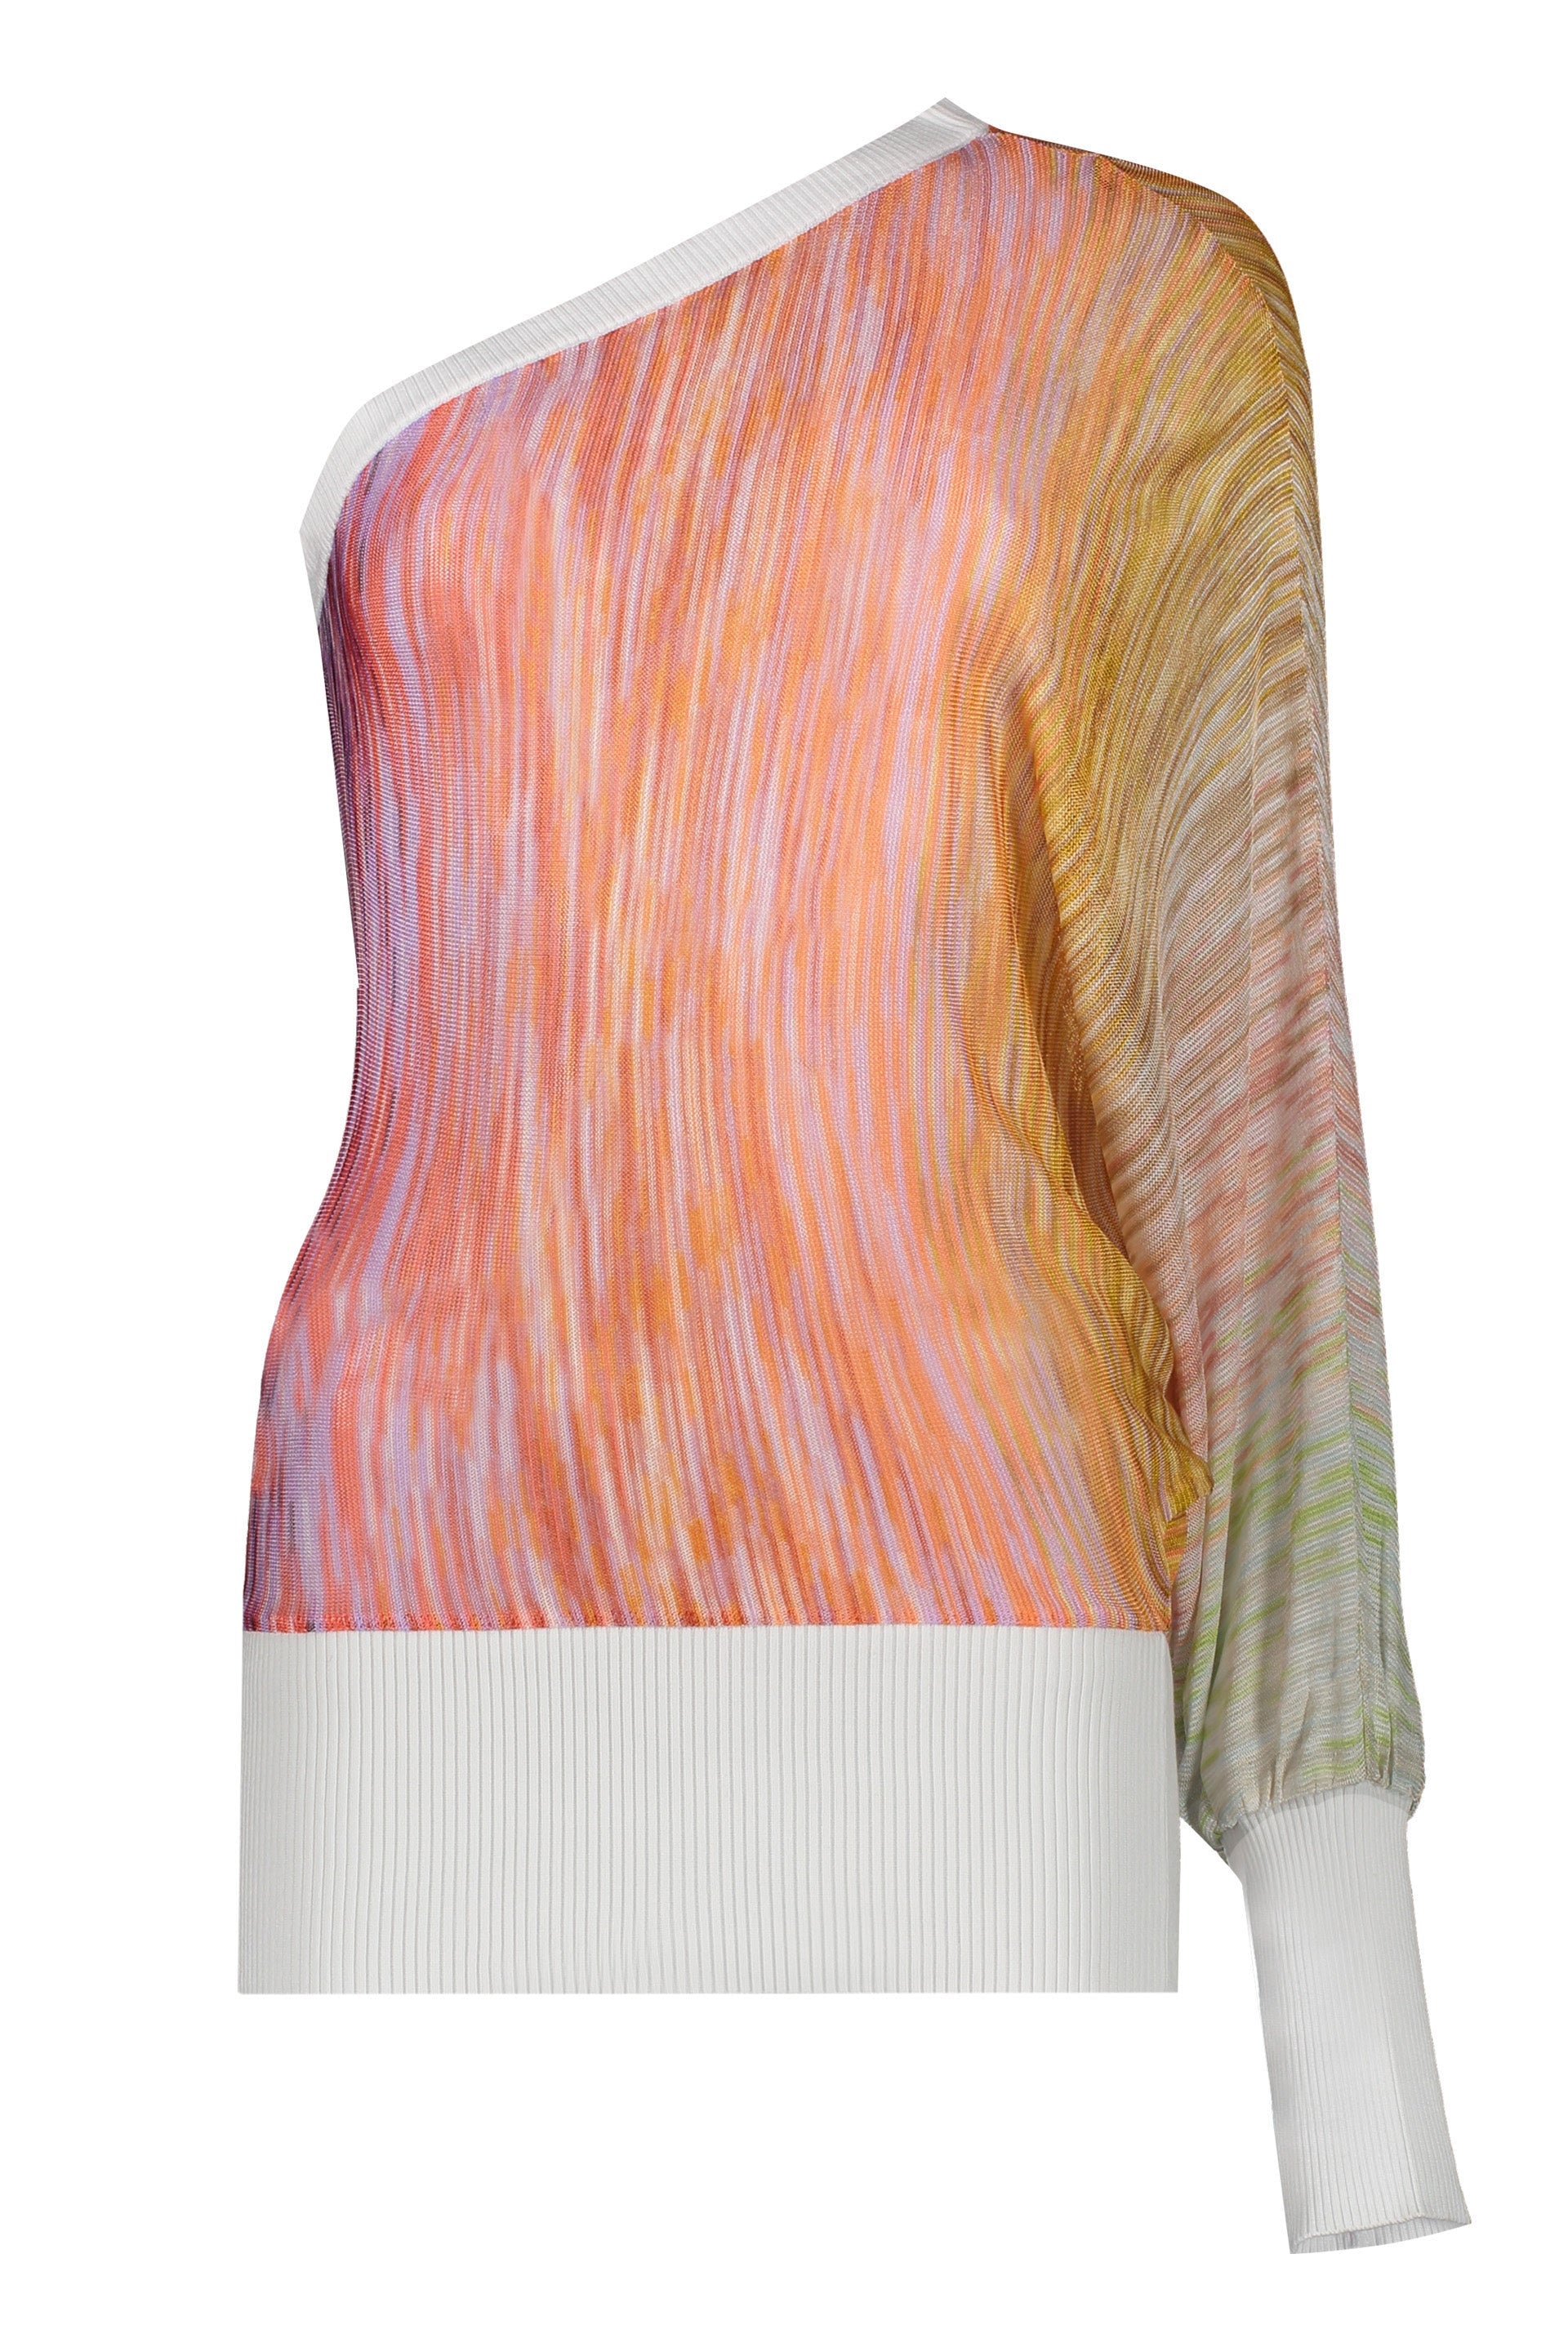 Missoni-OUTLET-SALE-Knitted-one-shoulder-top-Shirts-L-ARCHIVE-COLLECTION.jpg